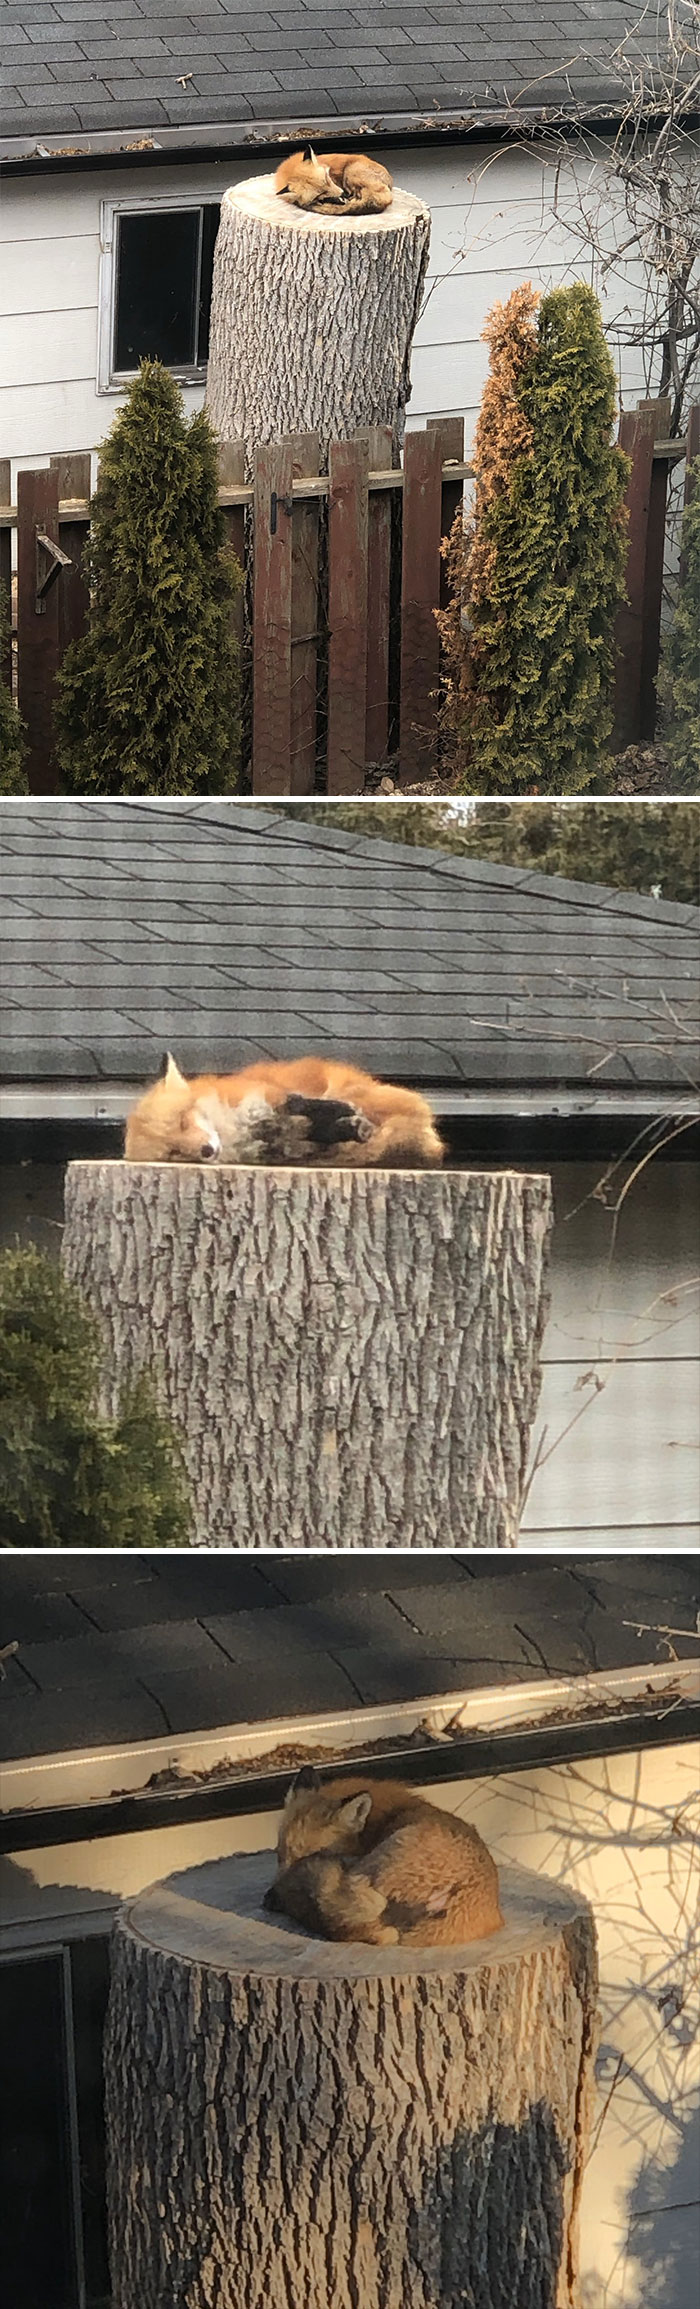 Can We All Just Take A Moment To Appreciate The Sweetest Lil Fox Sleeping On A Tree Stump In My Parent’s Backyard